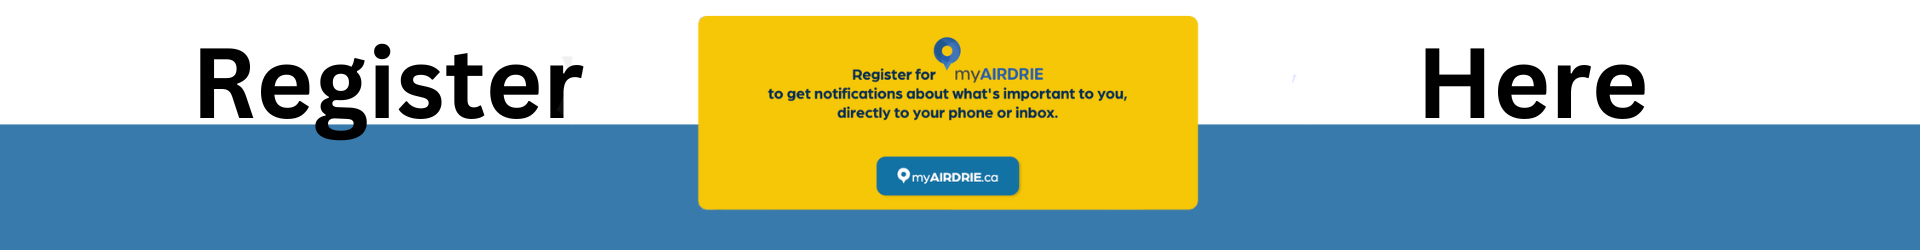 My airdrie app